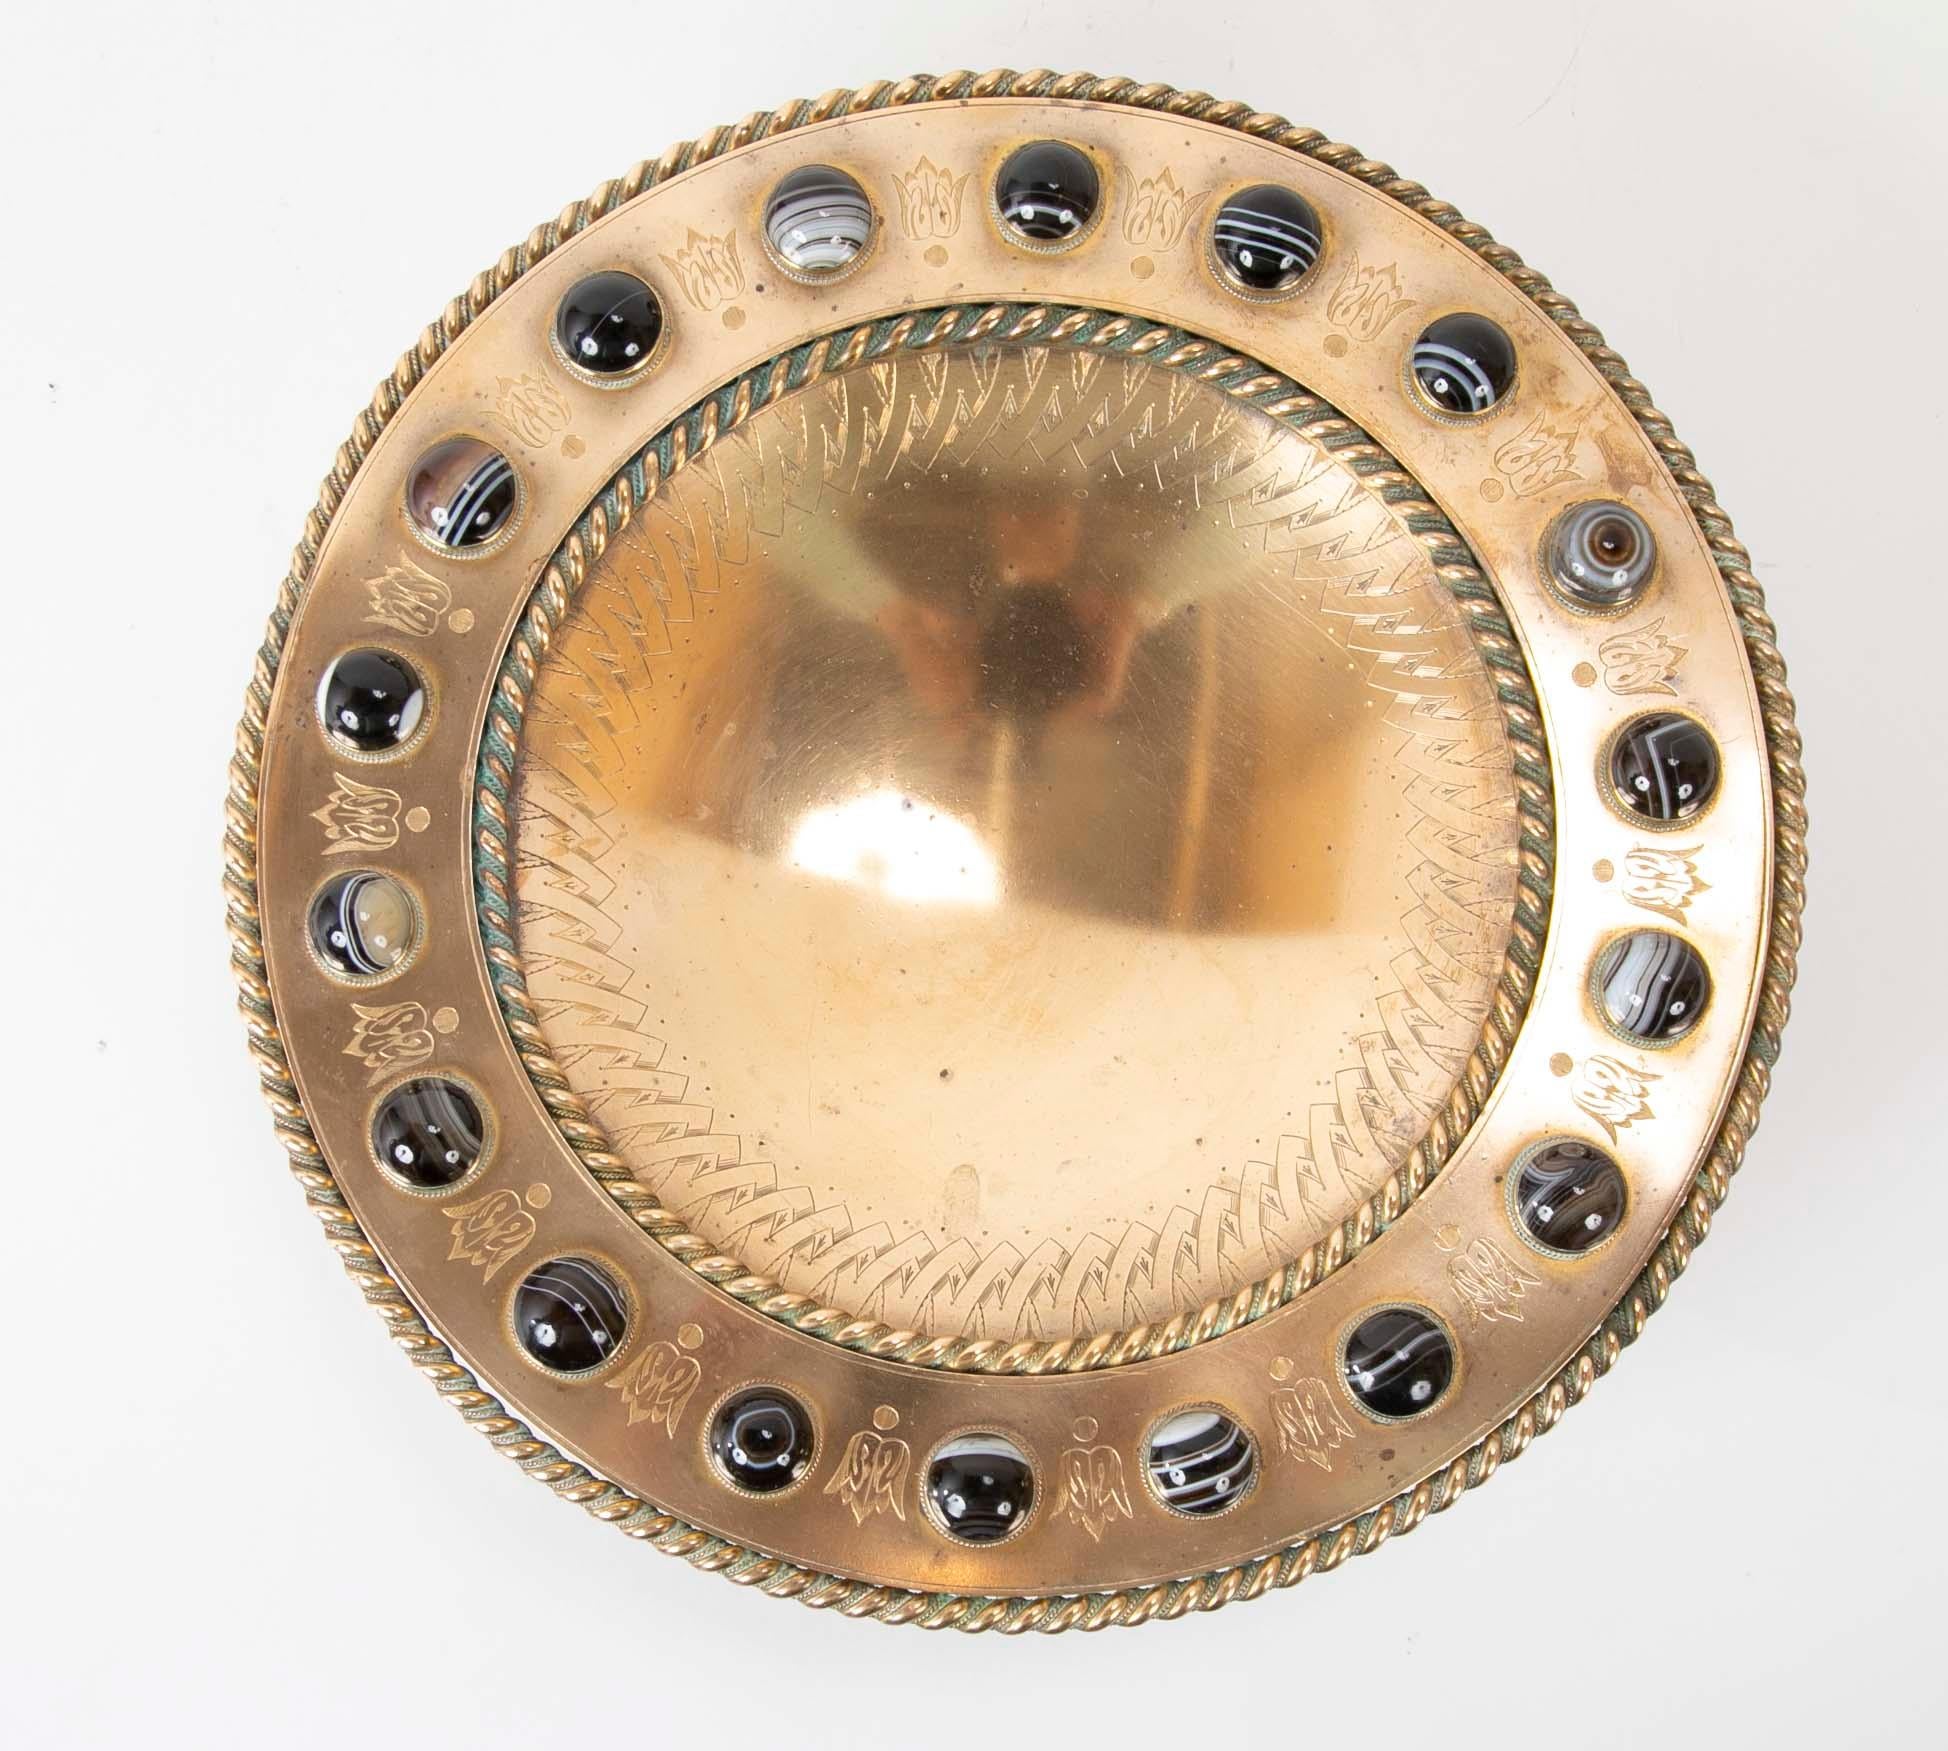 Aesthetic Movement Bronze Centerpiece with Agate Cabochons at the Rim